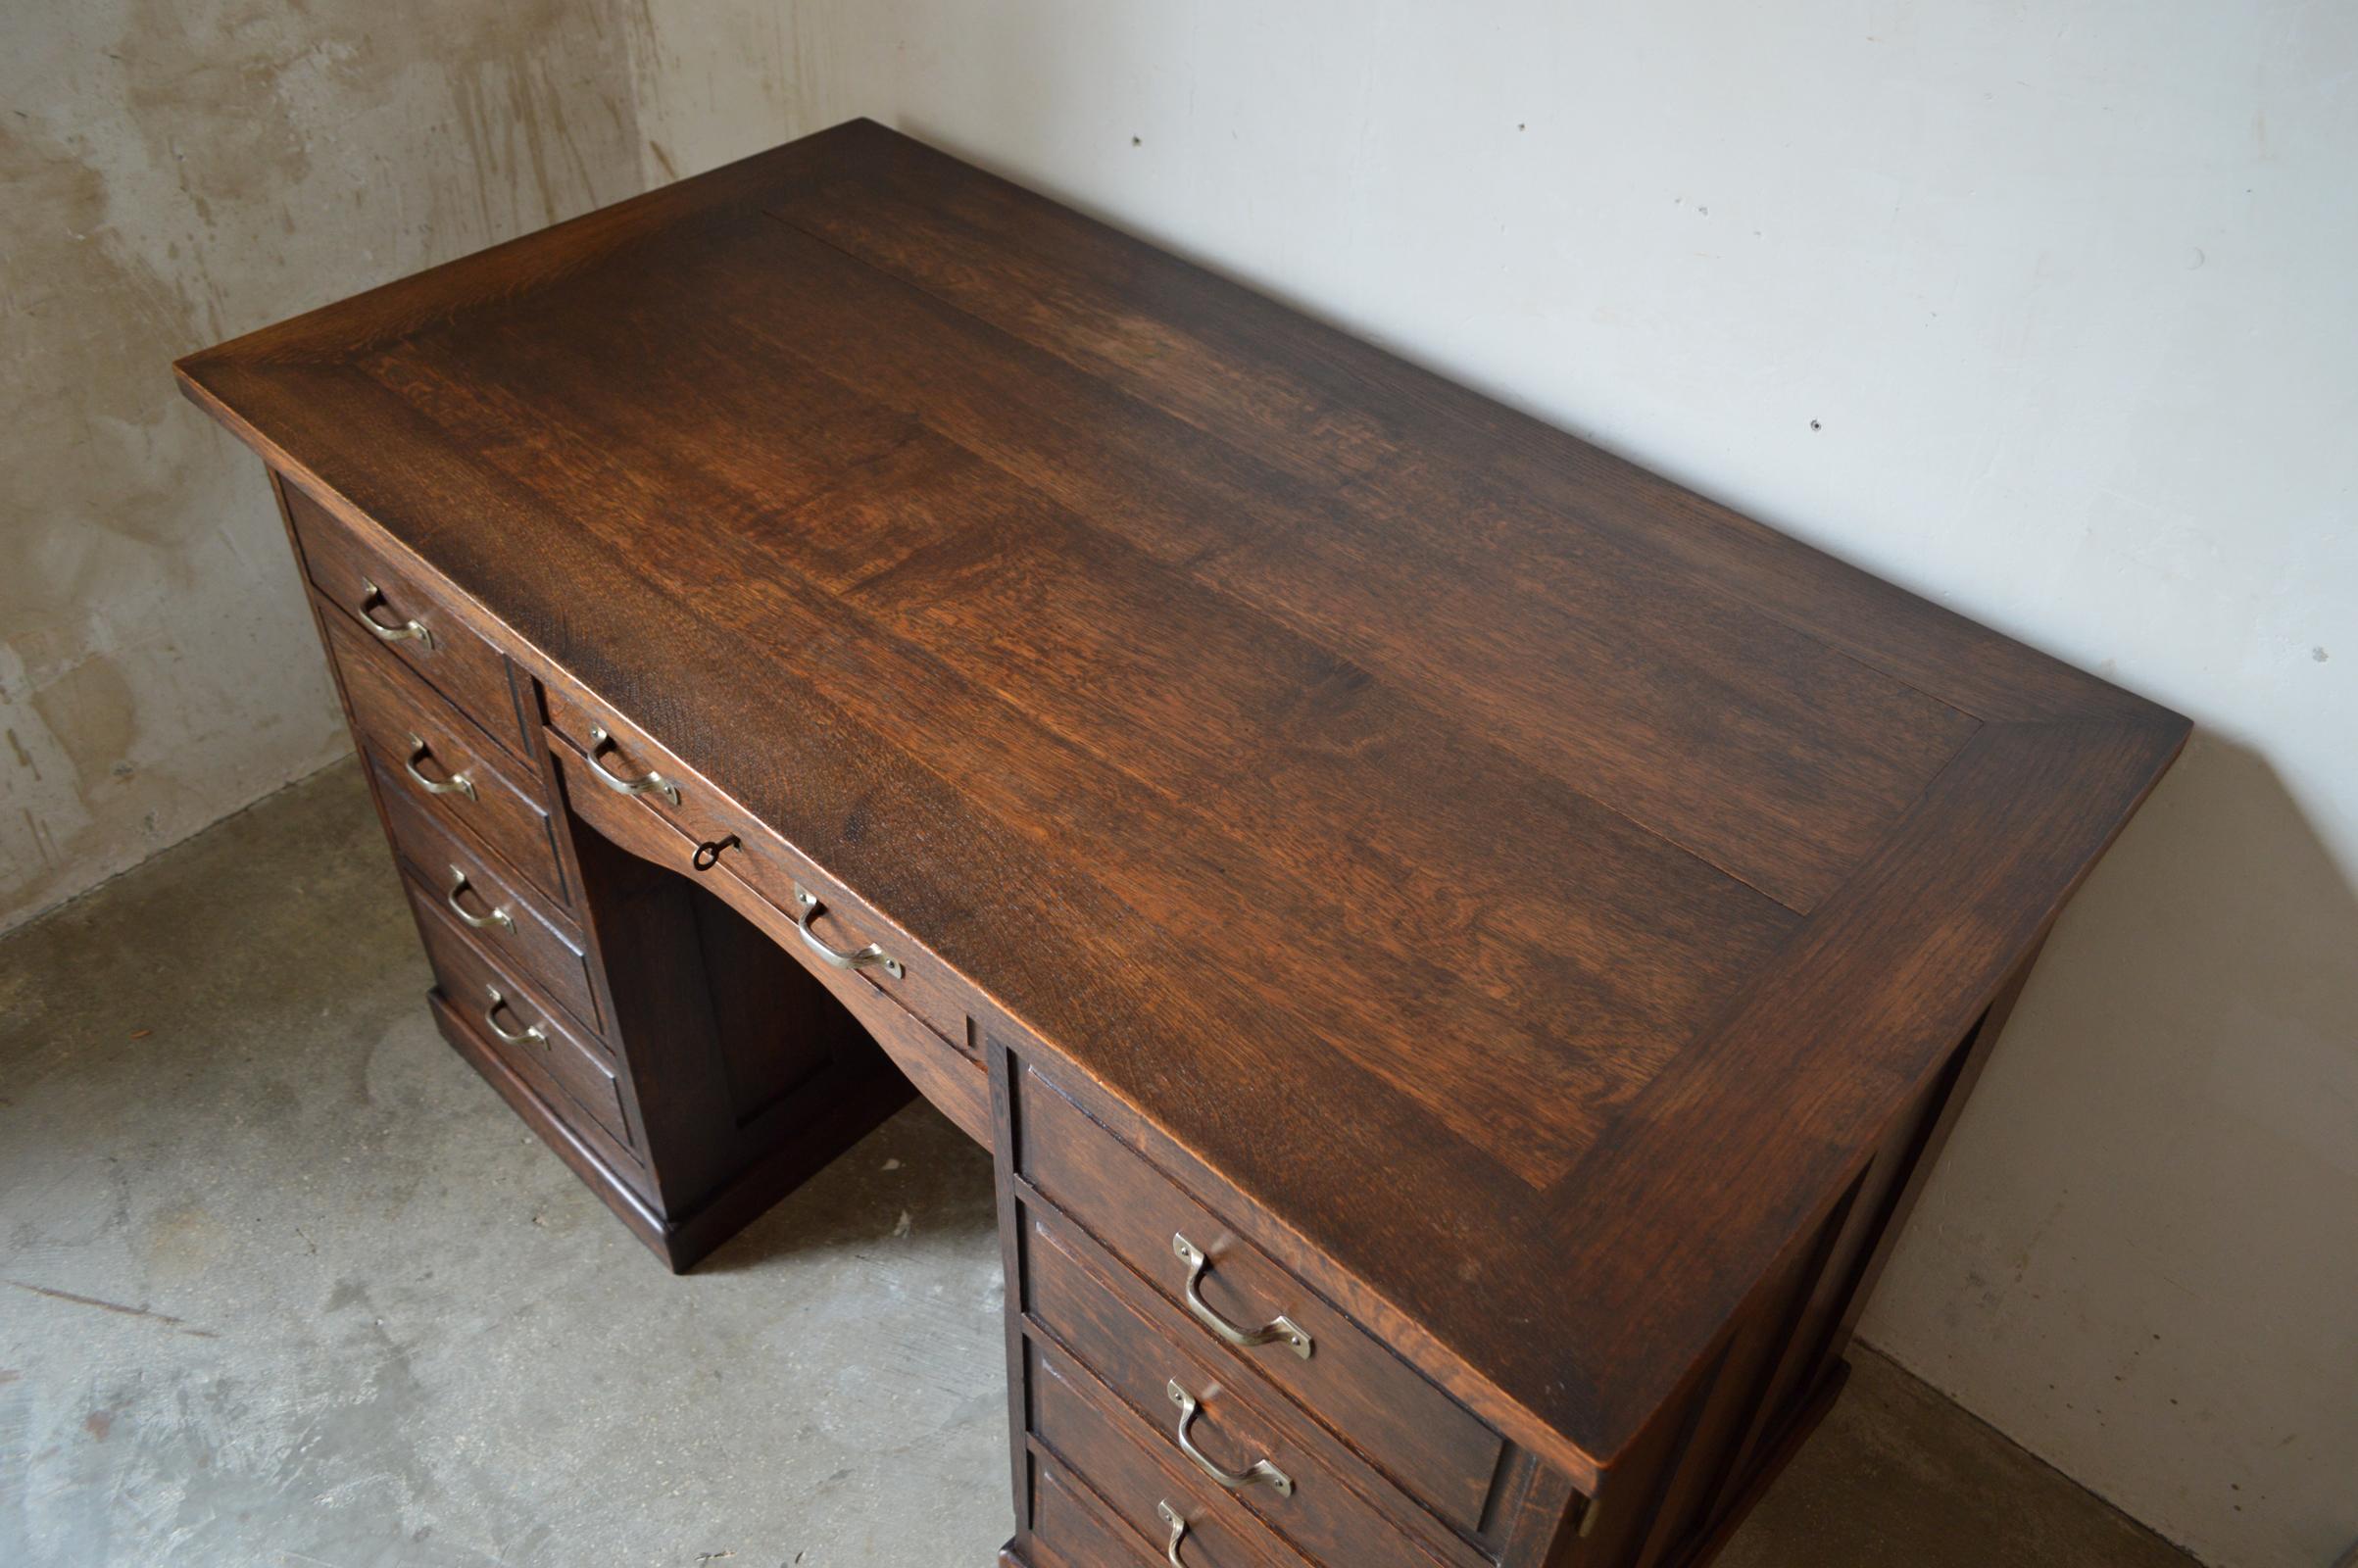 Early 20th Century French Art Deco Oak Desk with a Unusual Closing System by Securitas, circa 1925